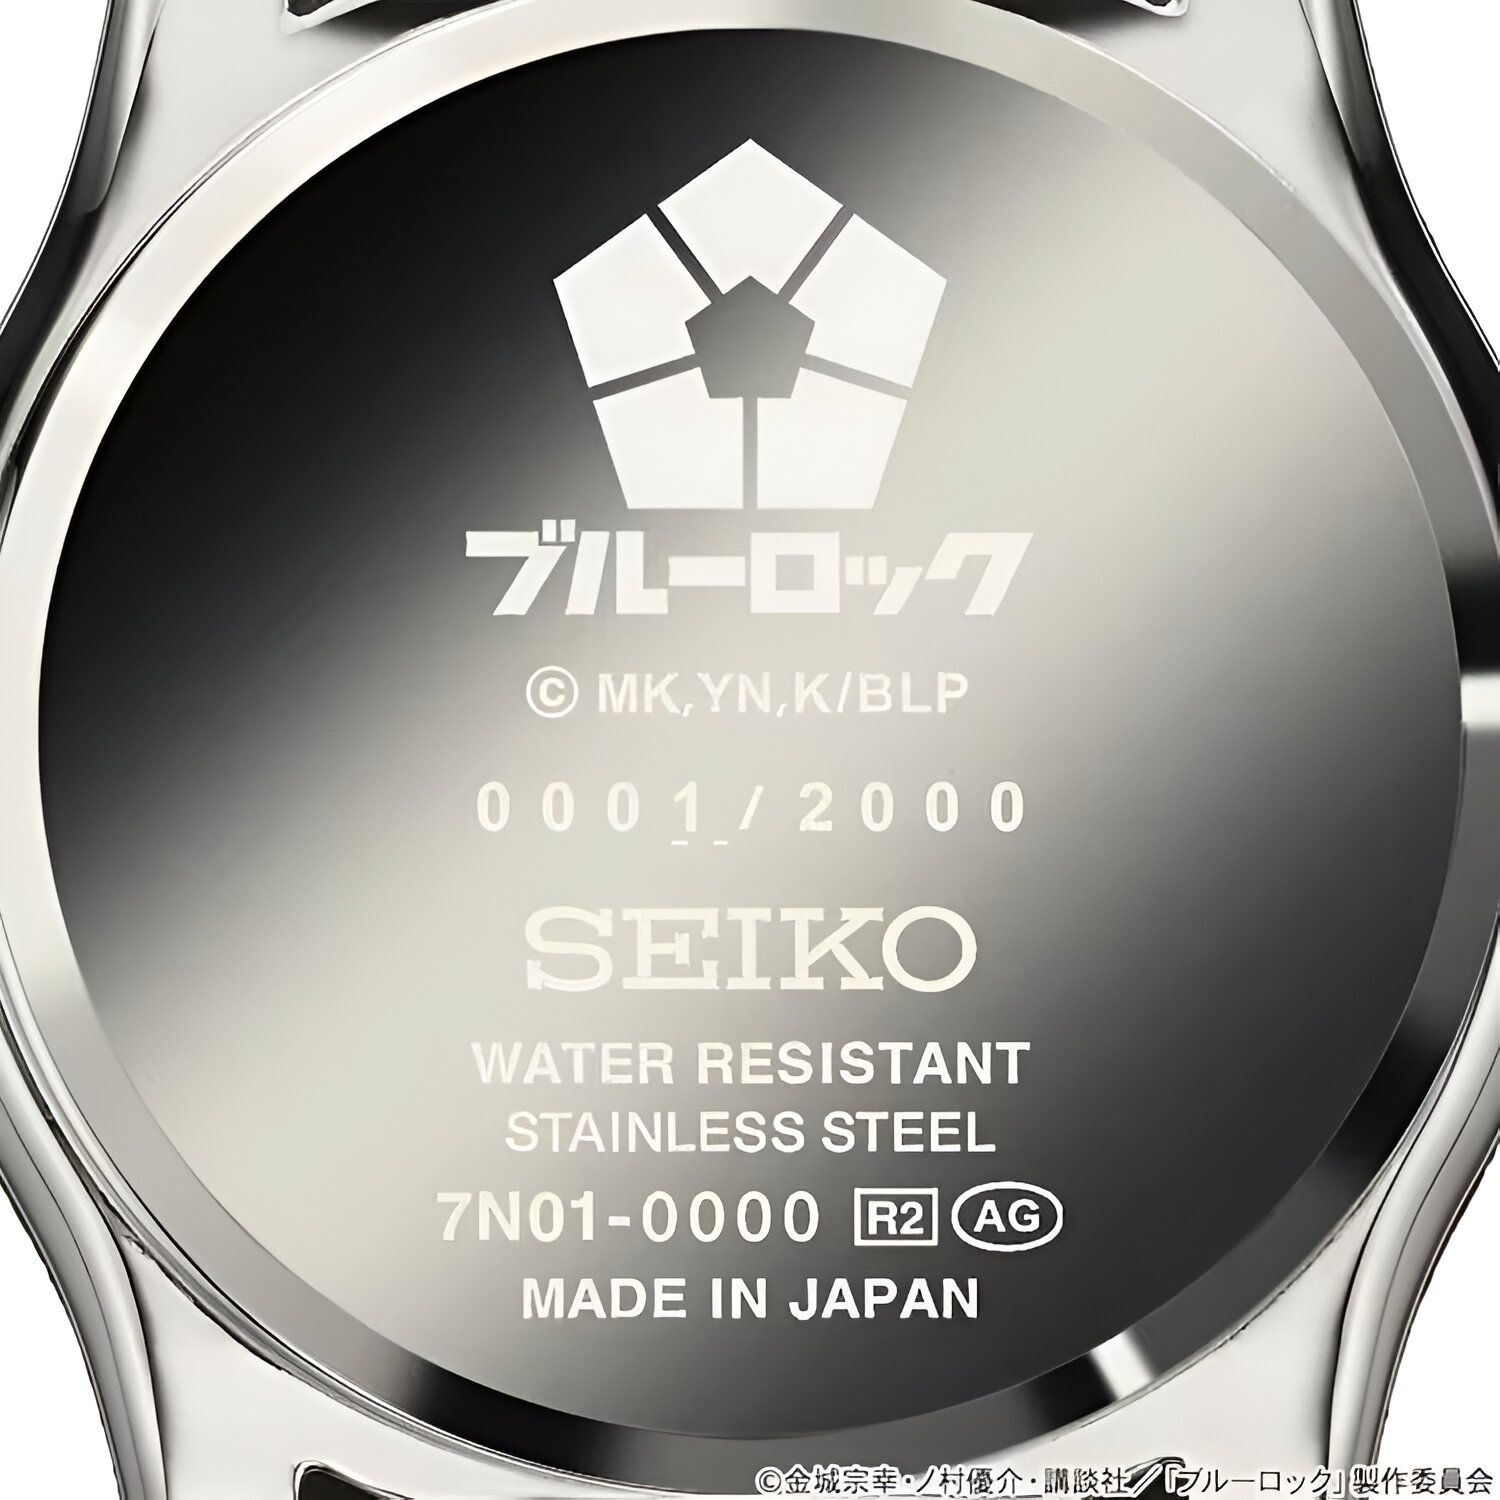 Blue Lock Gets Limited-Edition Nagi, Isagi and Rin Seiko Watch Release